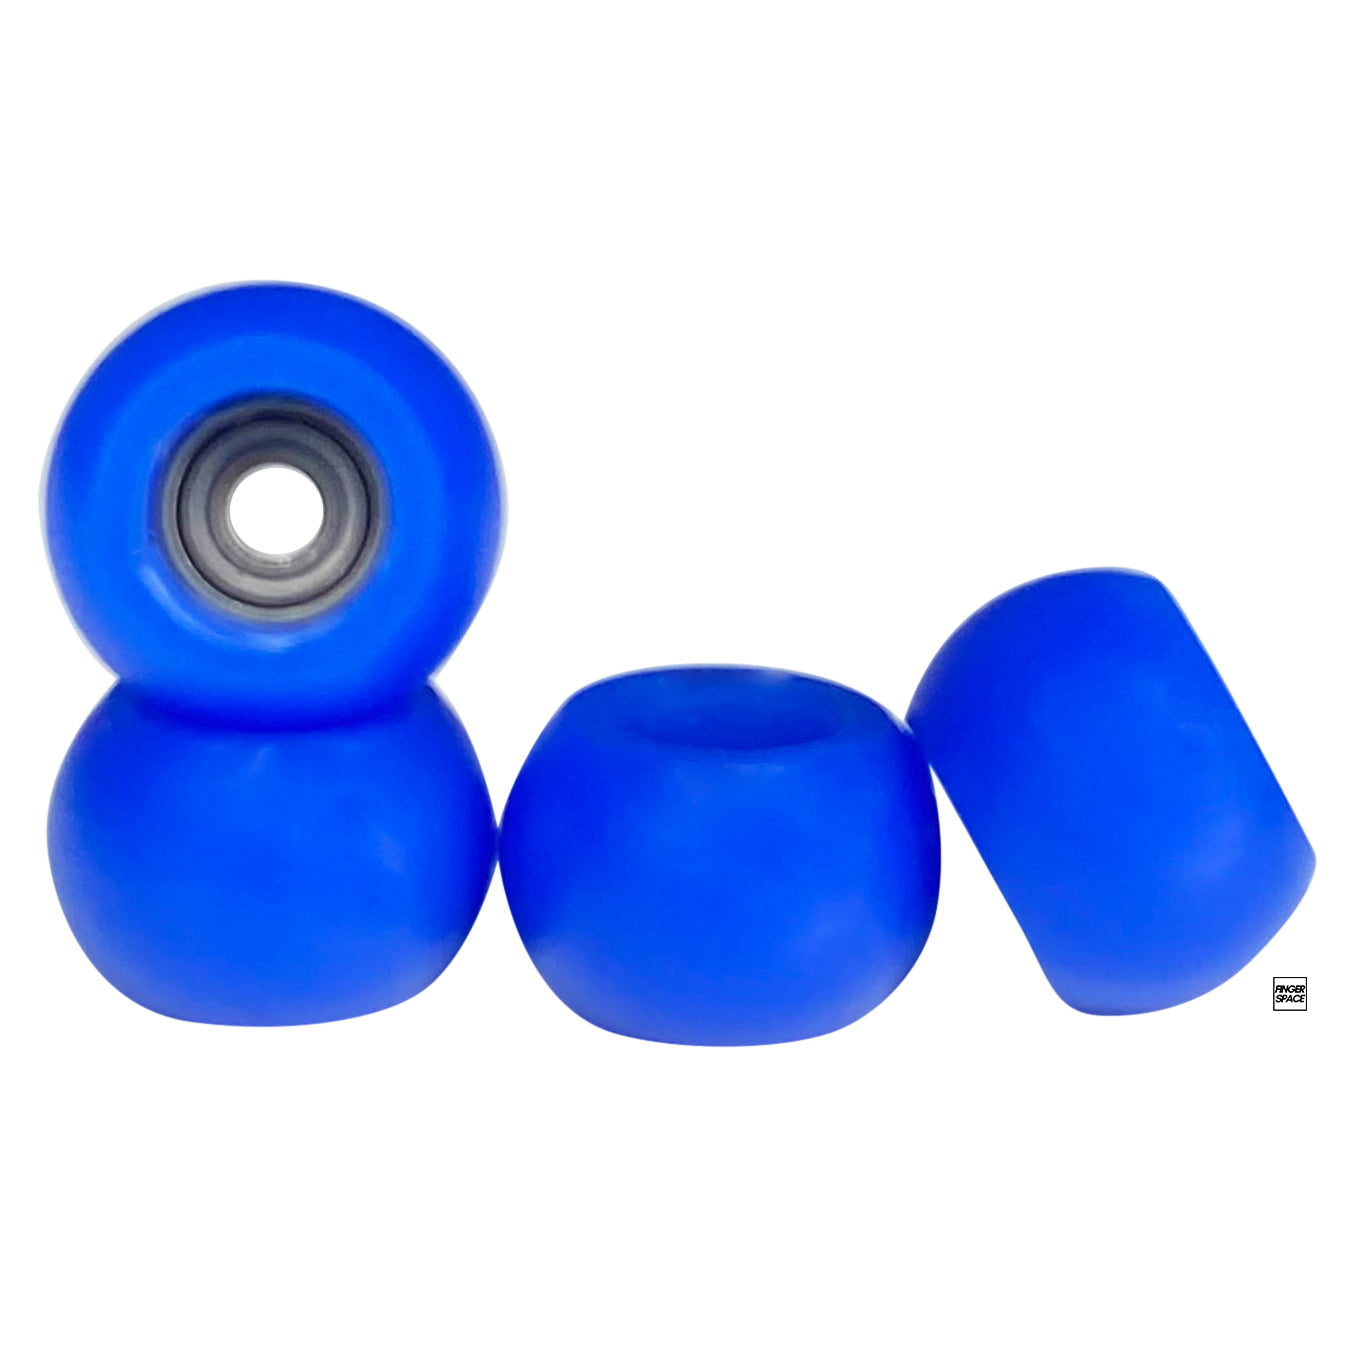 Rounded Roly Poly Wheels - "Electric Blue" Edition